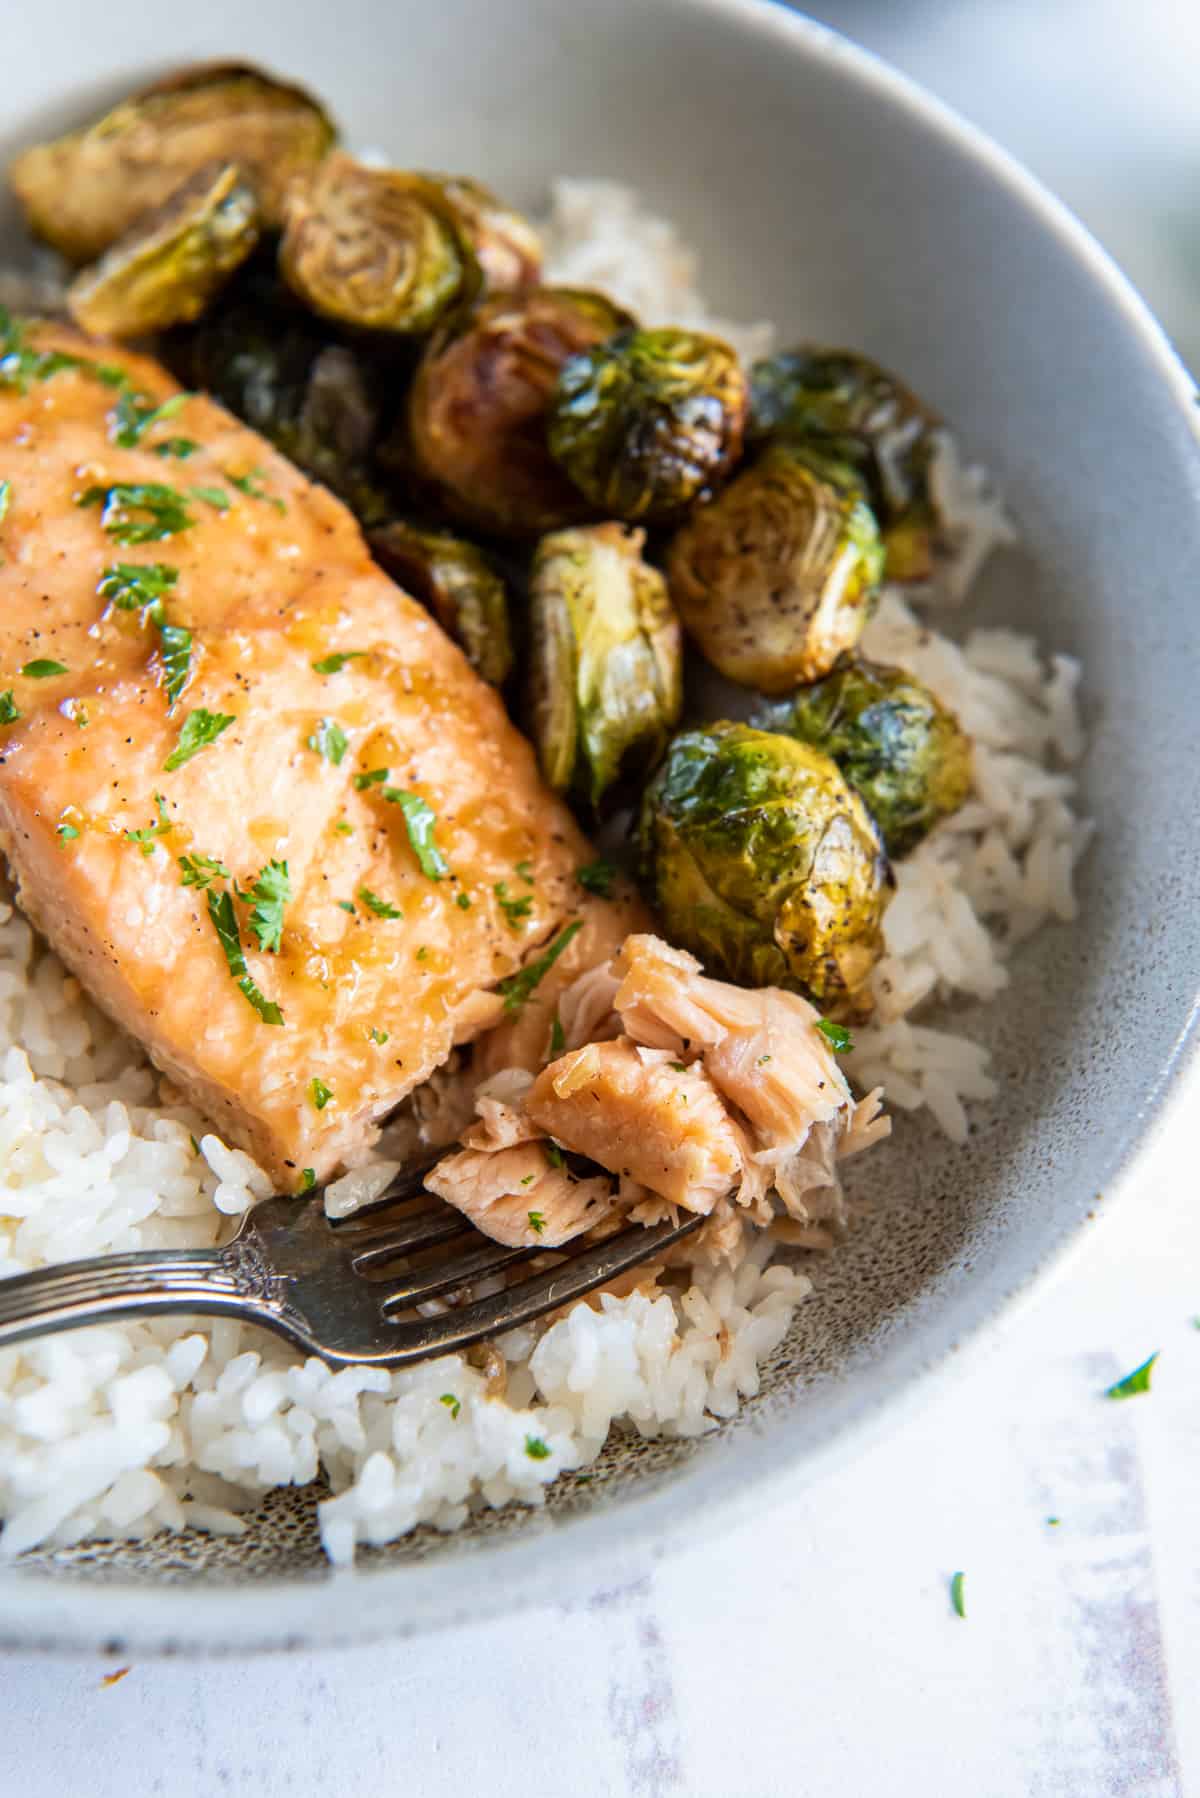 A fork breaking into salmon in a bowl with rice and brussels sprouts.